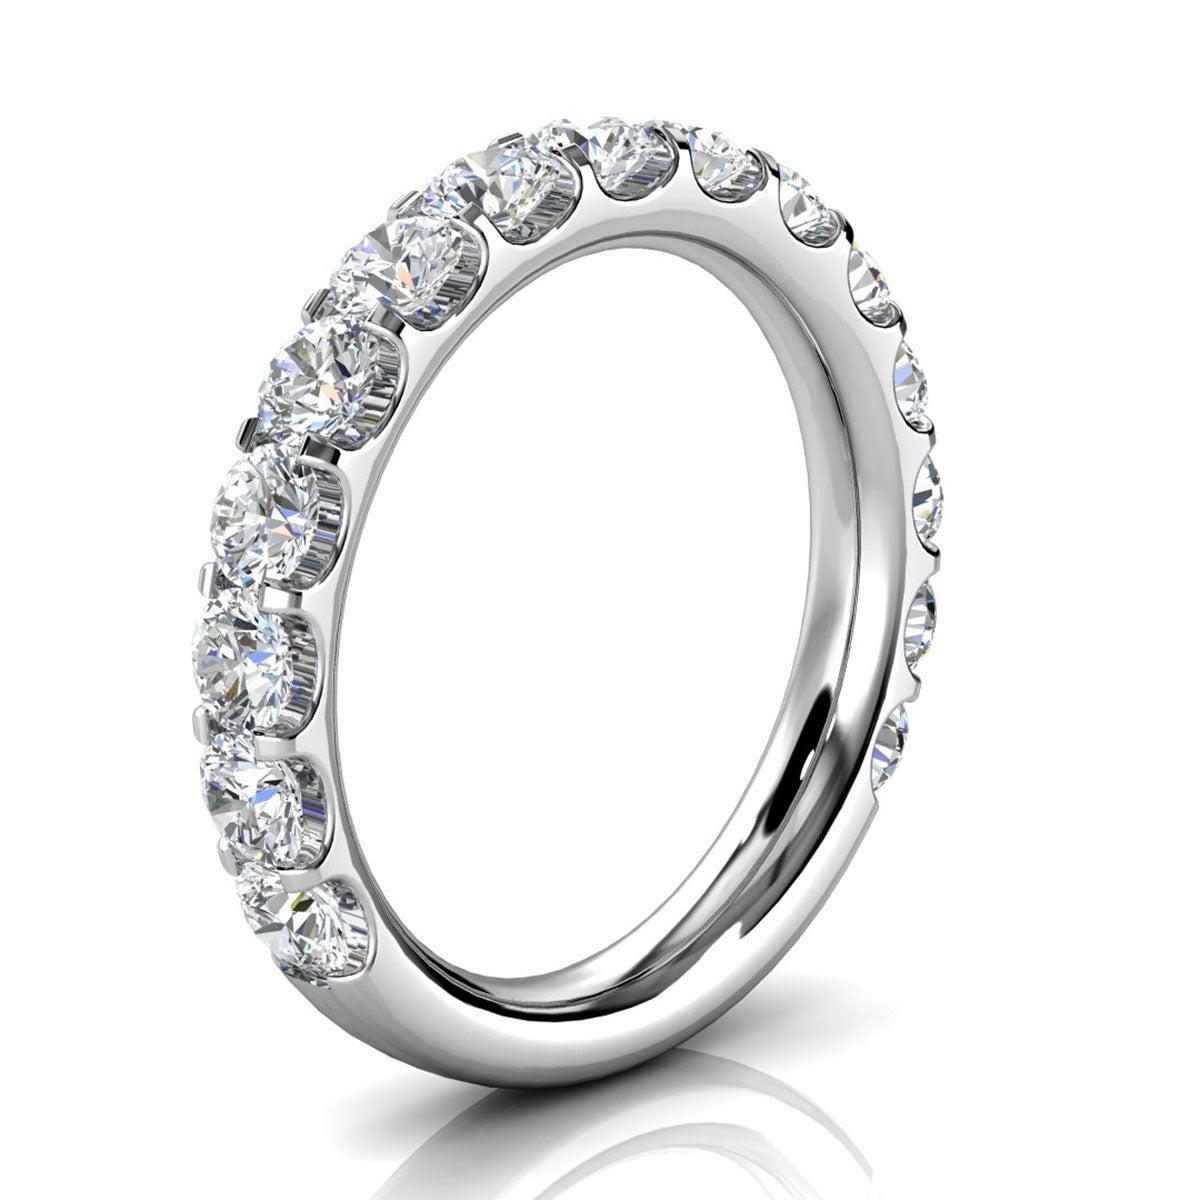 For Sale:  14k White Gold Carole Micro-Prong Diamond Ring '1 1/2 Ct. tw' 2